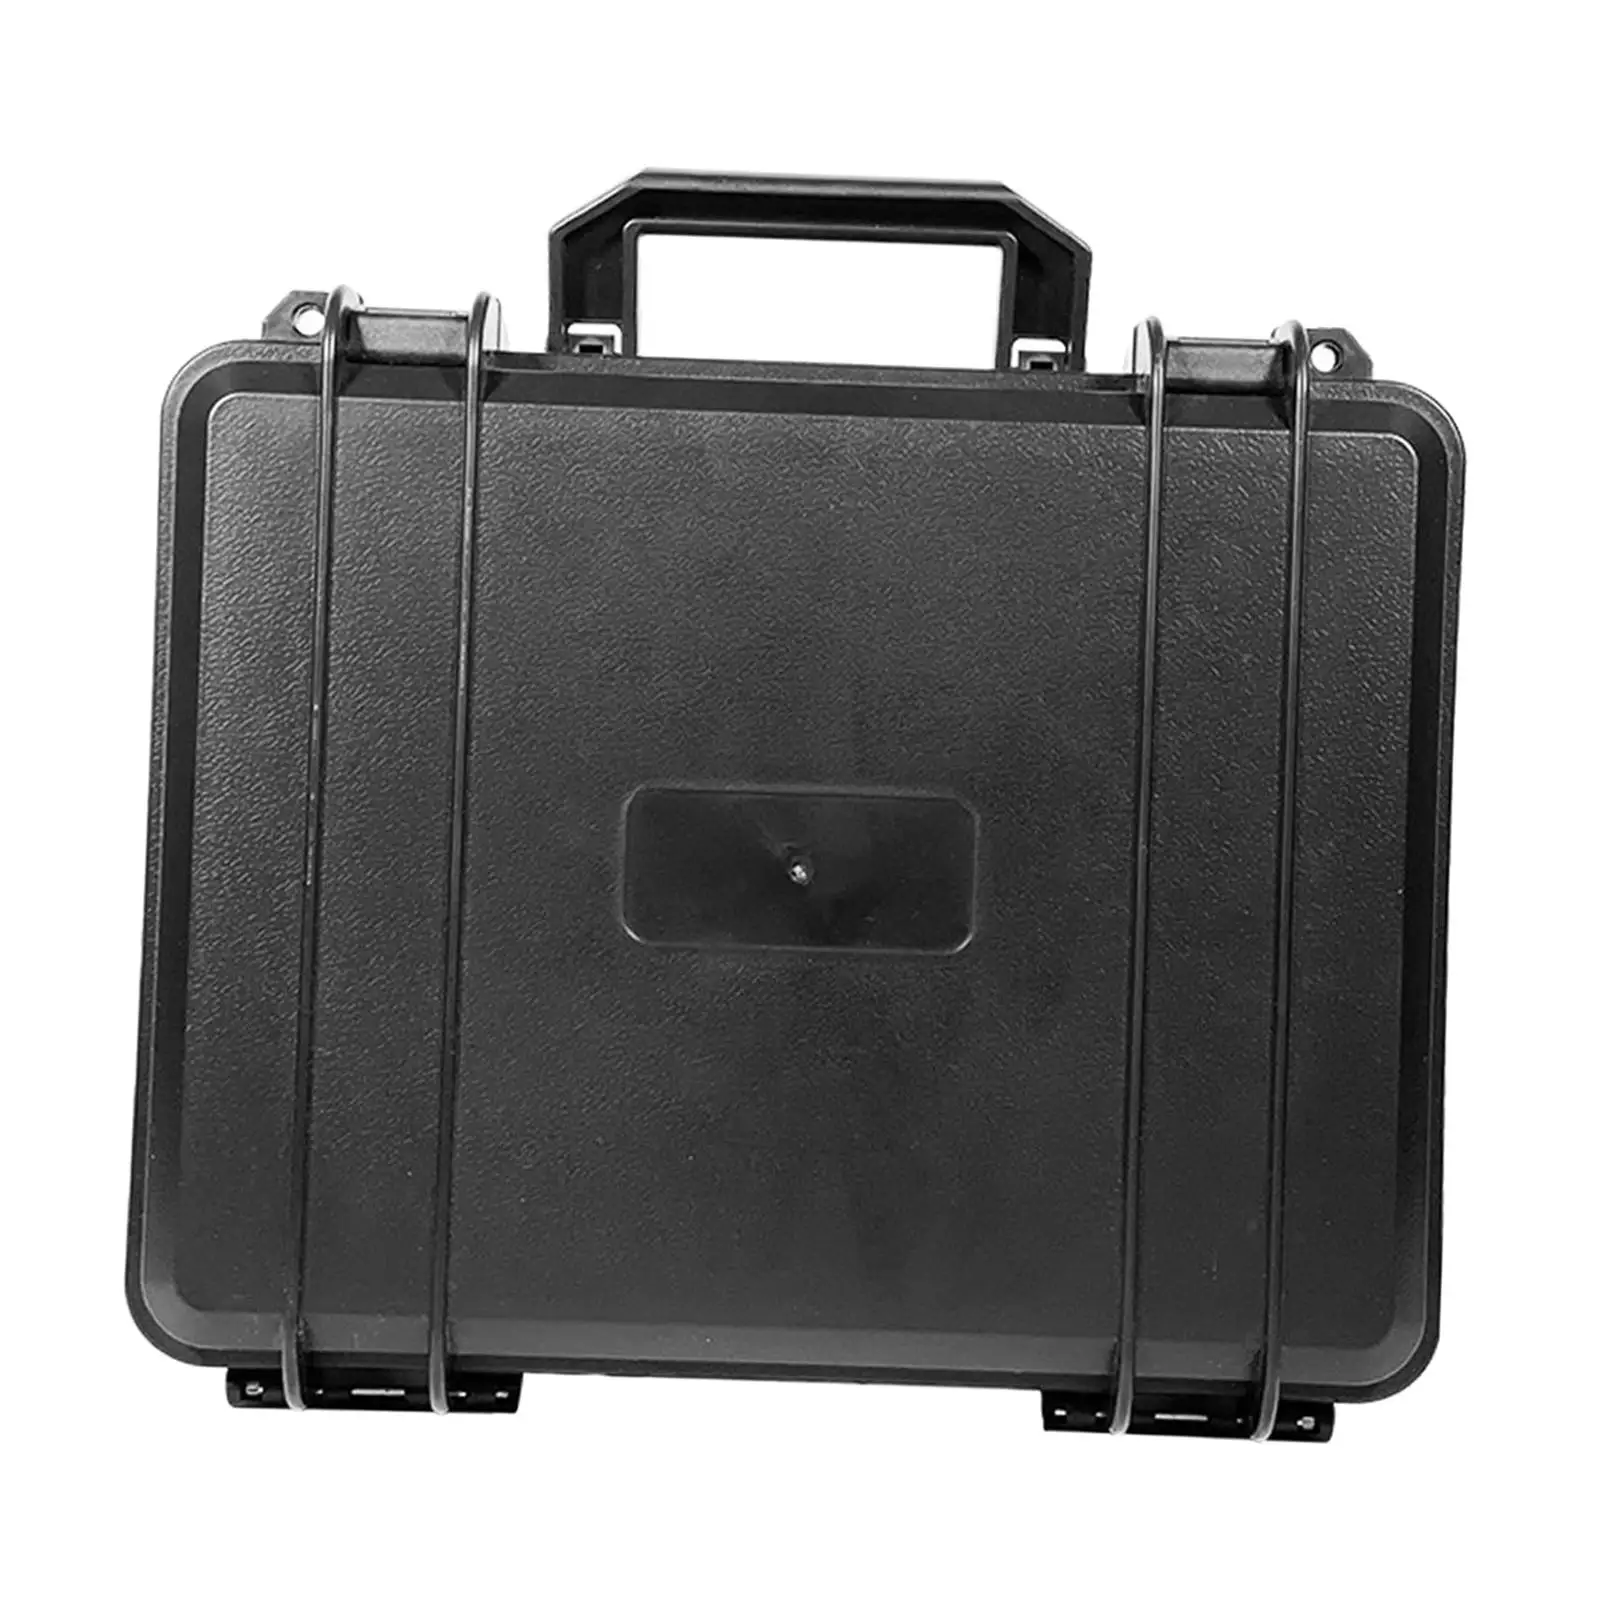 Universal Protective Toolbox Storage Box Wear Resistant Durable Equipment Lockable Suitcase Hardware for Outdoor Workplace